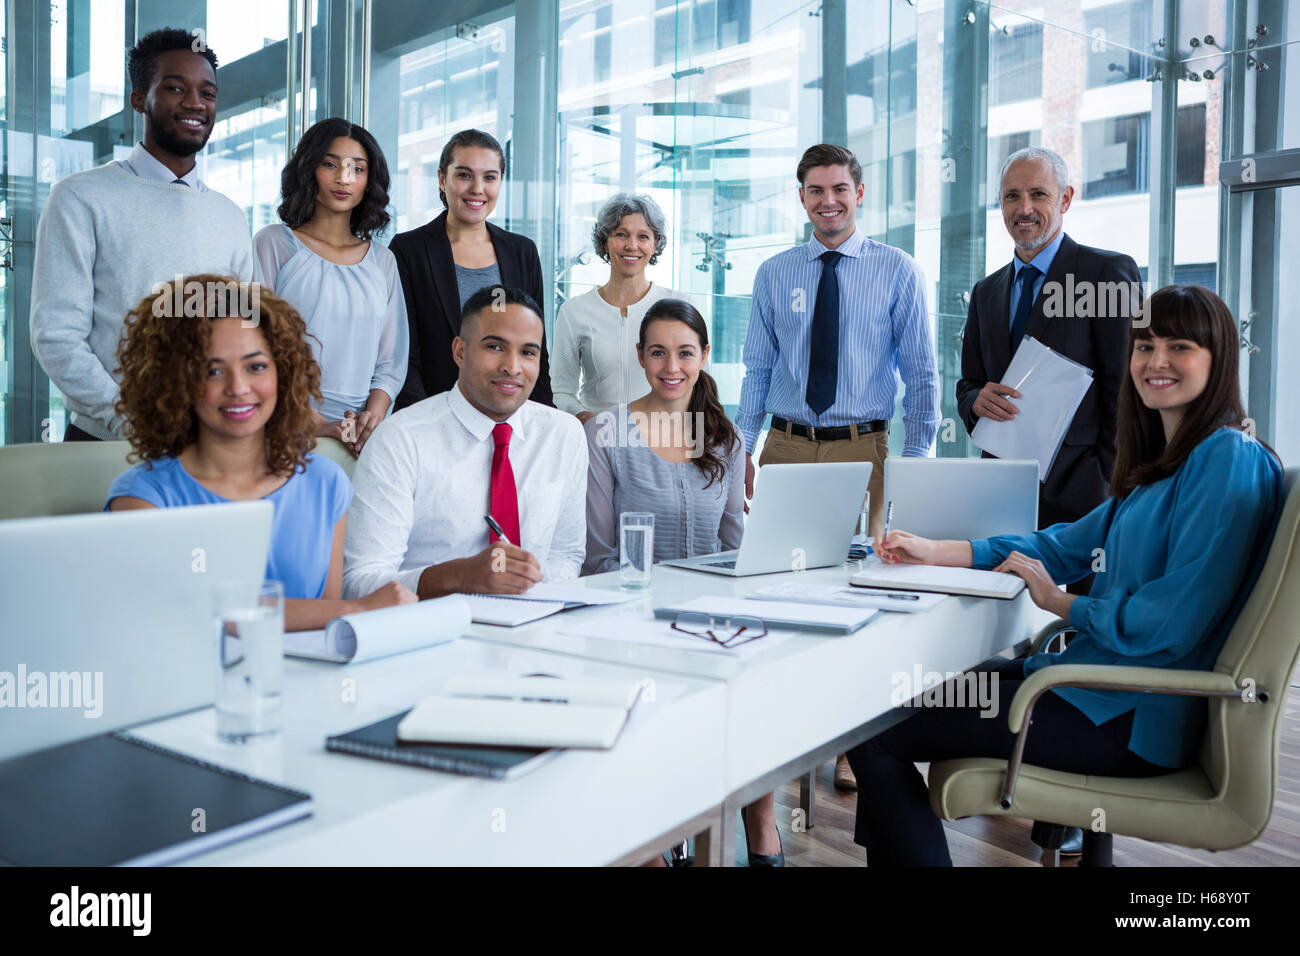 Smiling business people in office Stock Photo